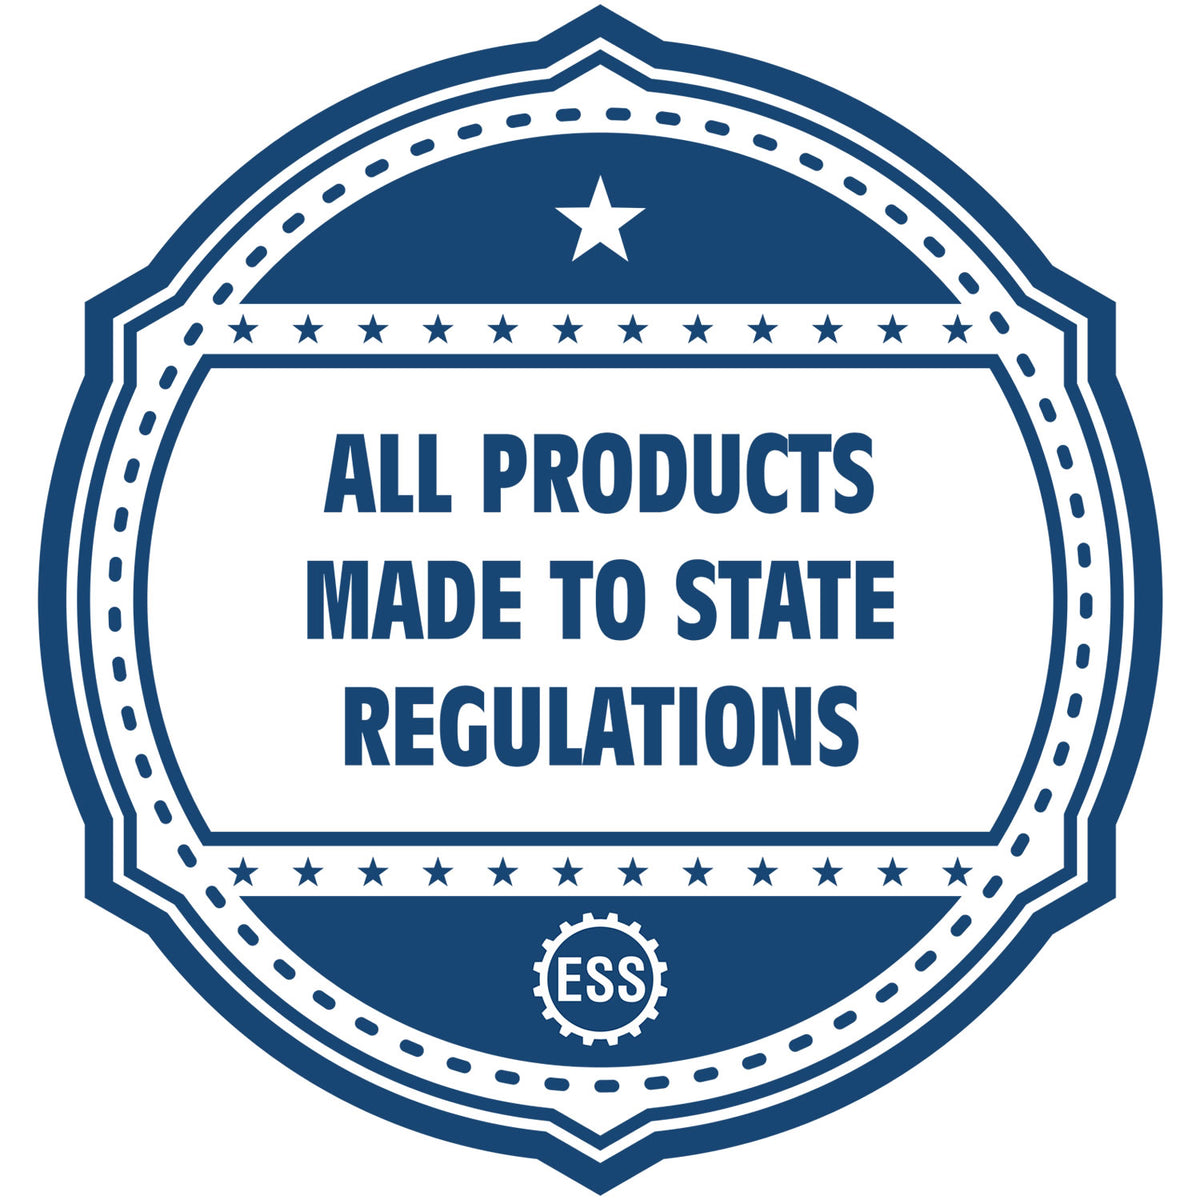 An icon or badge element for the Self-Inking Missouri Landscape Architect Stamp showing that this product is made in compliance with state regulations.